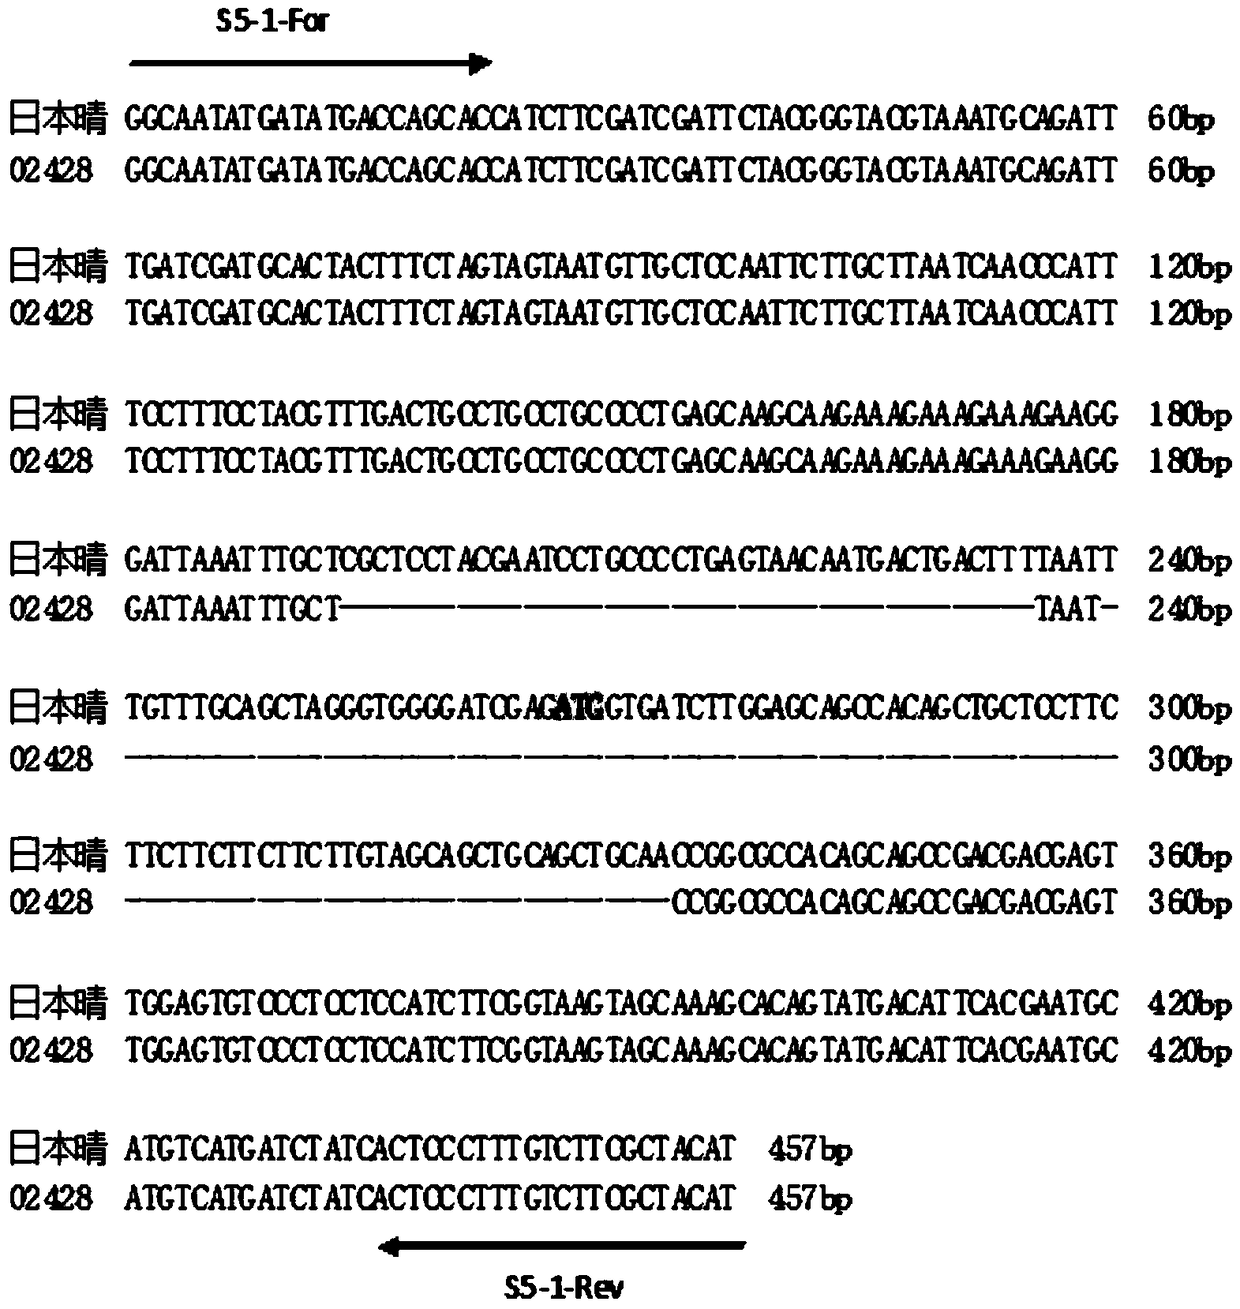 Kit and multiplex PCR detection method for simultaneous detection of rice wide affinity gene s5 and erect panicle gene dep1